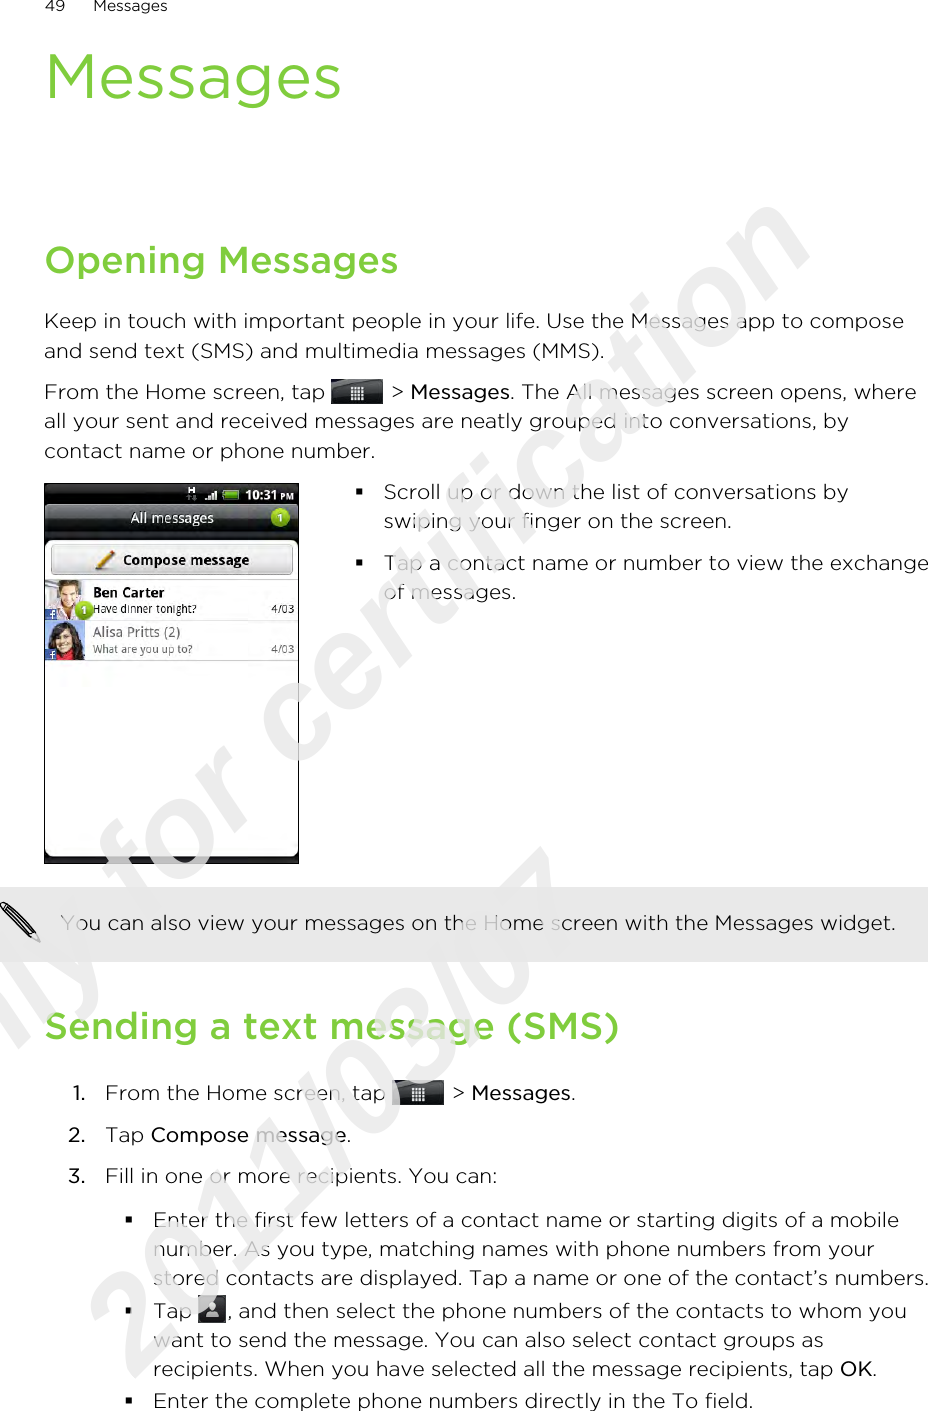 MessagesOpening MessagesKeep in touch with important people in your life. Use the Messages app to composeand send text (SMS) and multimedia messages (MMS).From the Home screen, tap   &gt; Messages. The All messages screen opens, whereall your sent and received messages are neatly grouped into conversations, bycontact name or phone number.§Scroll up or down the list of conversations byswiping your finger on the screen.§Tap a contact name or number to view the exchangeof messages.You can also view your messages on the Home screen with the Messages widget.Sending a text message (SMS)1. From the Home screen, tap   &gt; Messages.2. Tap Compose message.3. Fill in one or more recipients. You can:§Enter the first few letters of a contact name or starting digits of a mobilenumber. As you type, matching names with phone numbers from yourstored contacts are displayed. Tap a name or one of the contact’s numbers.§Tap  , and then select the phone numbers of the contacts to whom youwant to send the message. You can also select contact groups asrecipients. When you have selected all the message recipients, tap OK.§Enter the complete phone numbers directly in the To field.49 MessagesOnly for certification  2011/03/07